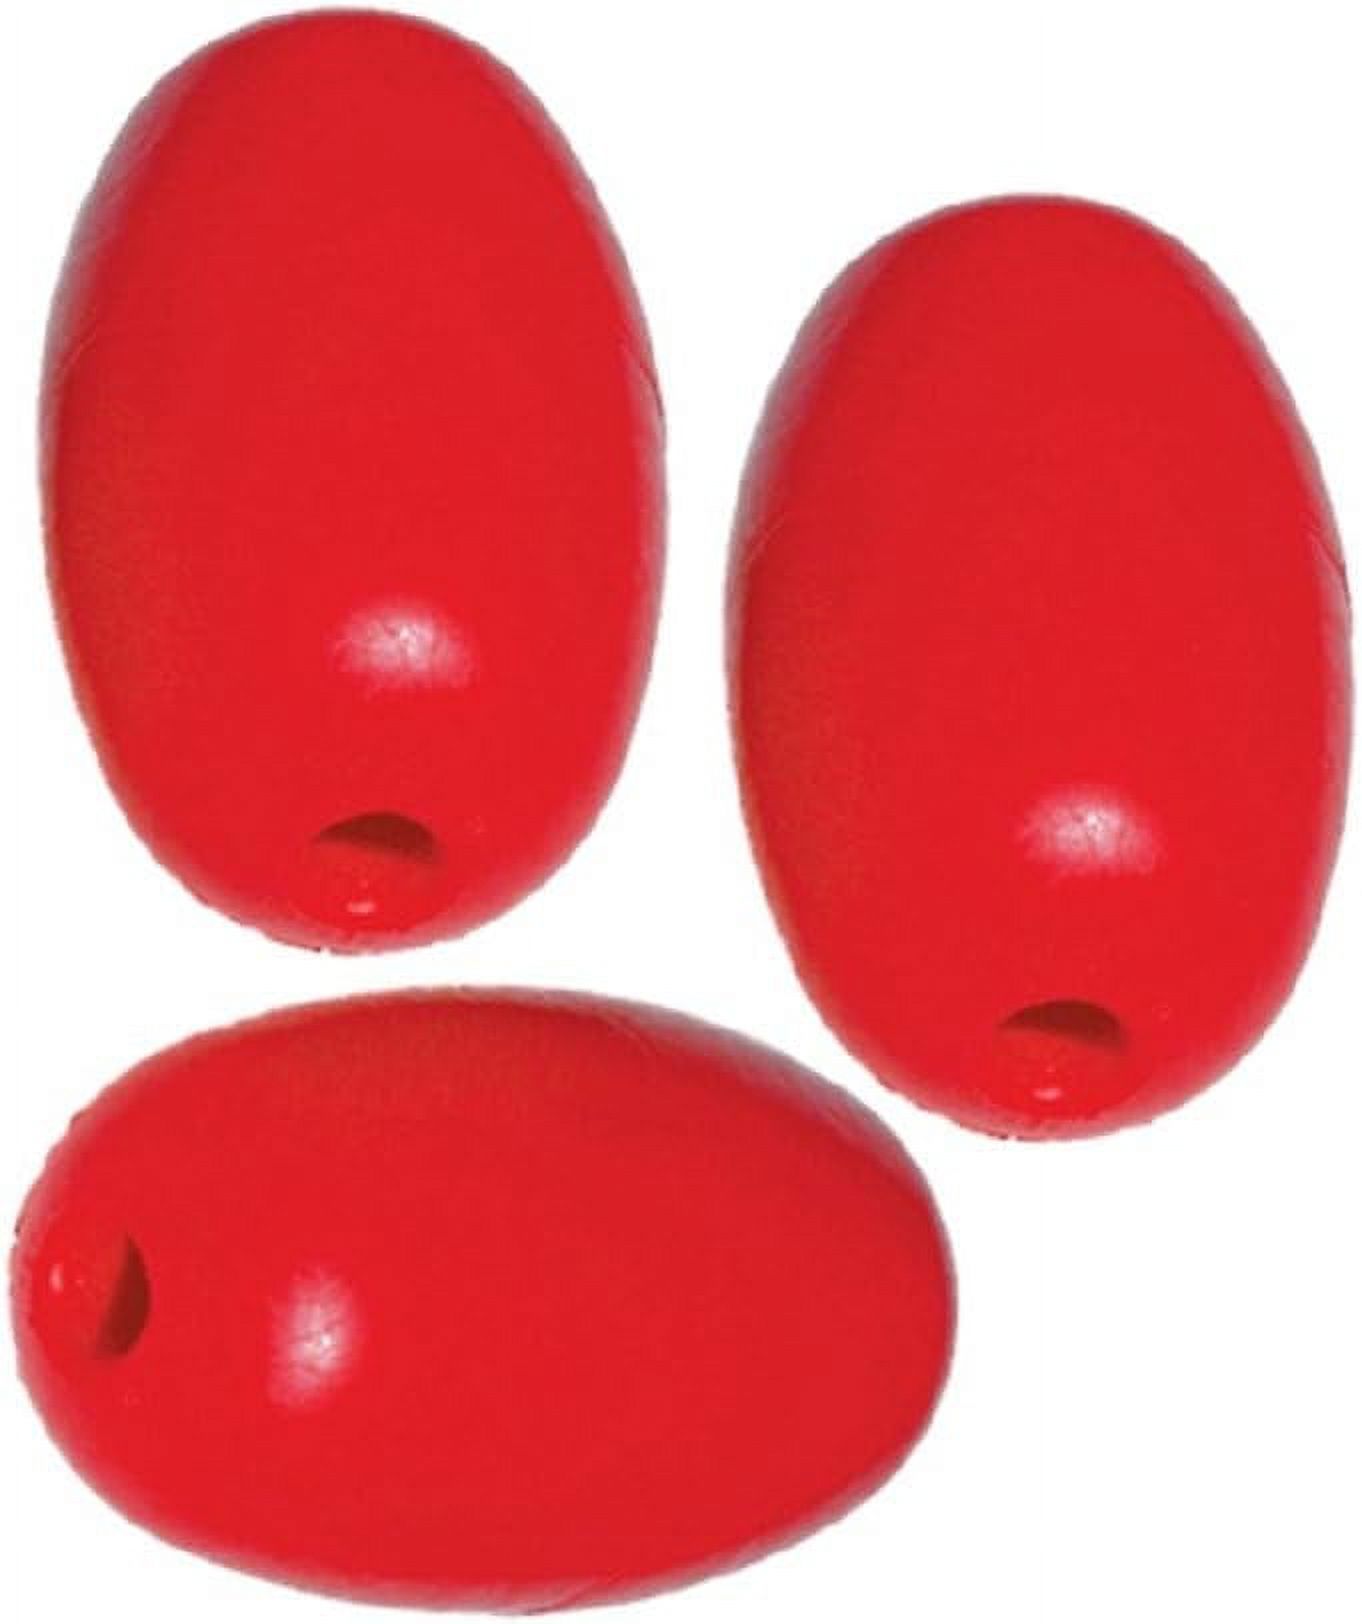 Orange Cycle Parts Red Floats For Pools, Water Ski Ropes, Anchor Lines ...